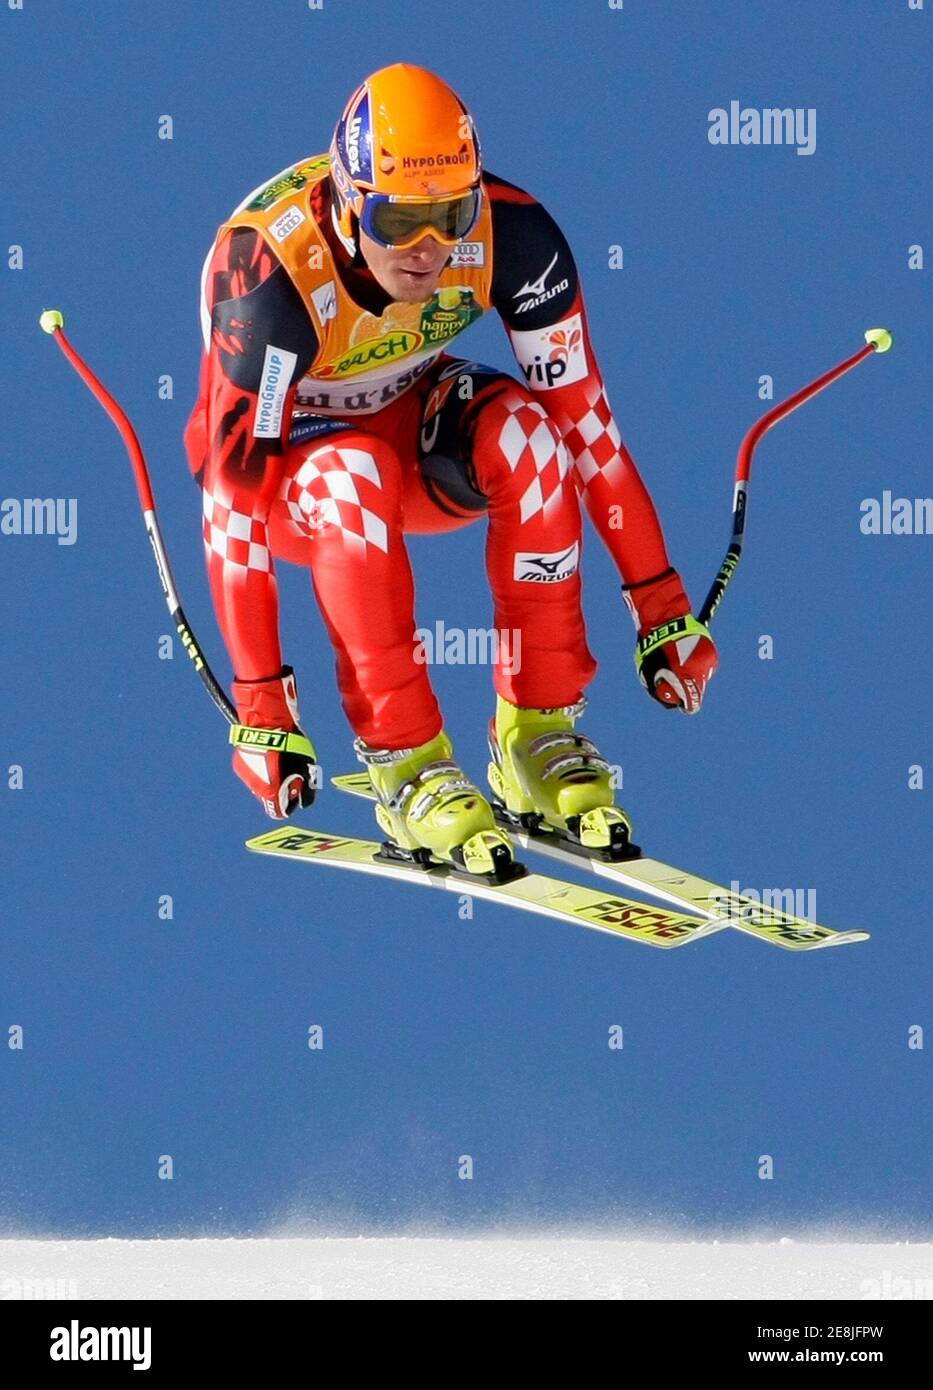 Ivica Kostelic of Croatia takes a jump downhill to finish second at the men's Alpine Skiing World Cup Super Combined event, that consists of one downhill and one slalom run, in Val d'Isere February 3, 2008. Bode Miller of the U.S. won ahead of Kostelic and Natko Zrncic-Dim of Croatia.  REUTERS/Pascal Lauener   (FRANCE)REUTERS/Pascal Lauener (FRANCE) Stock Photo